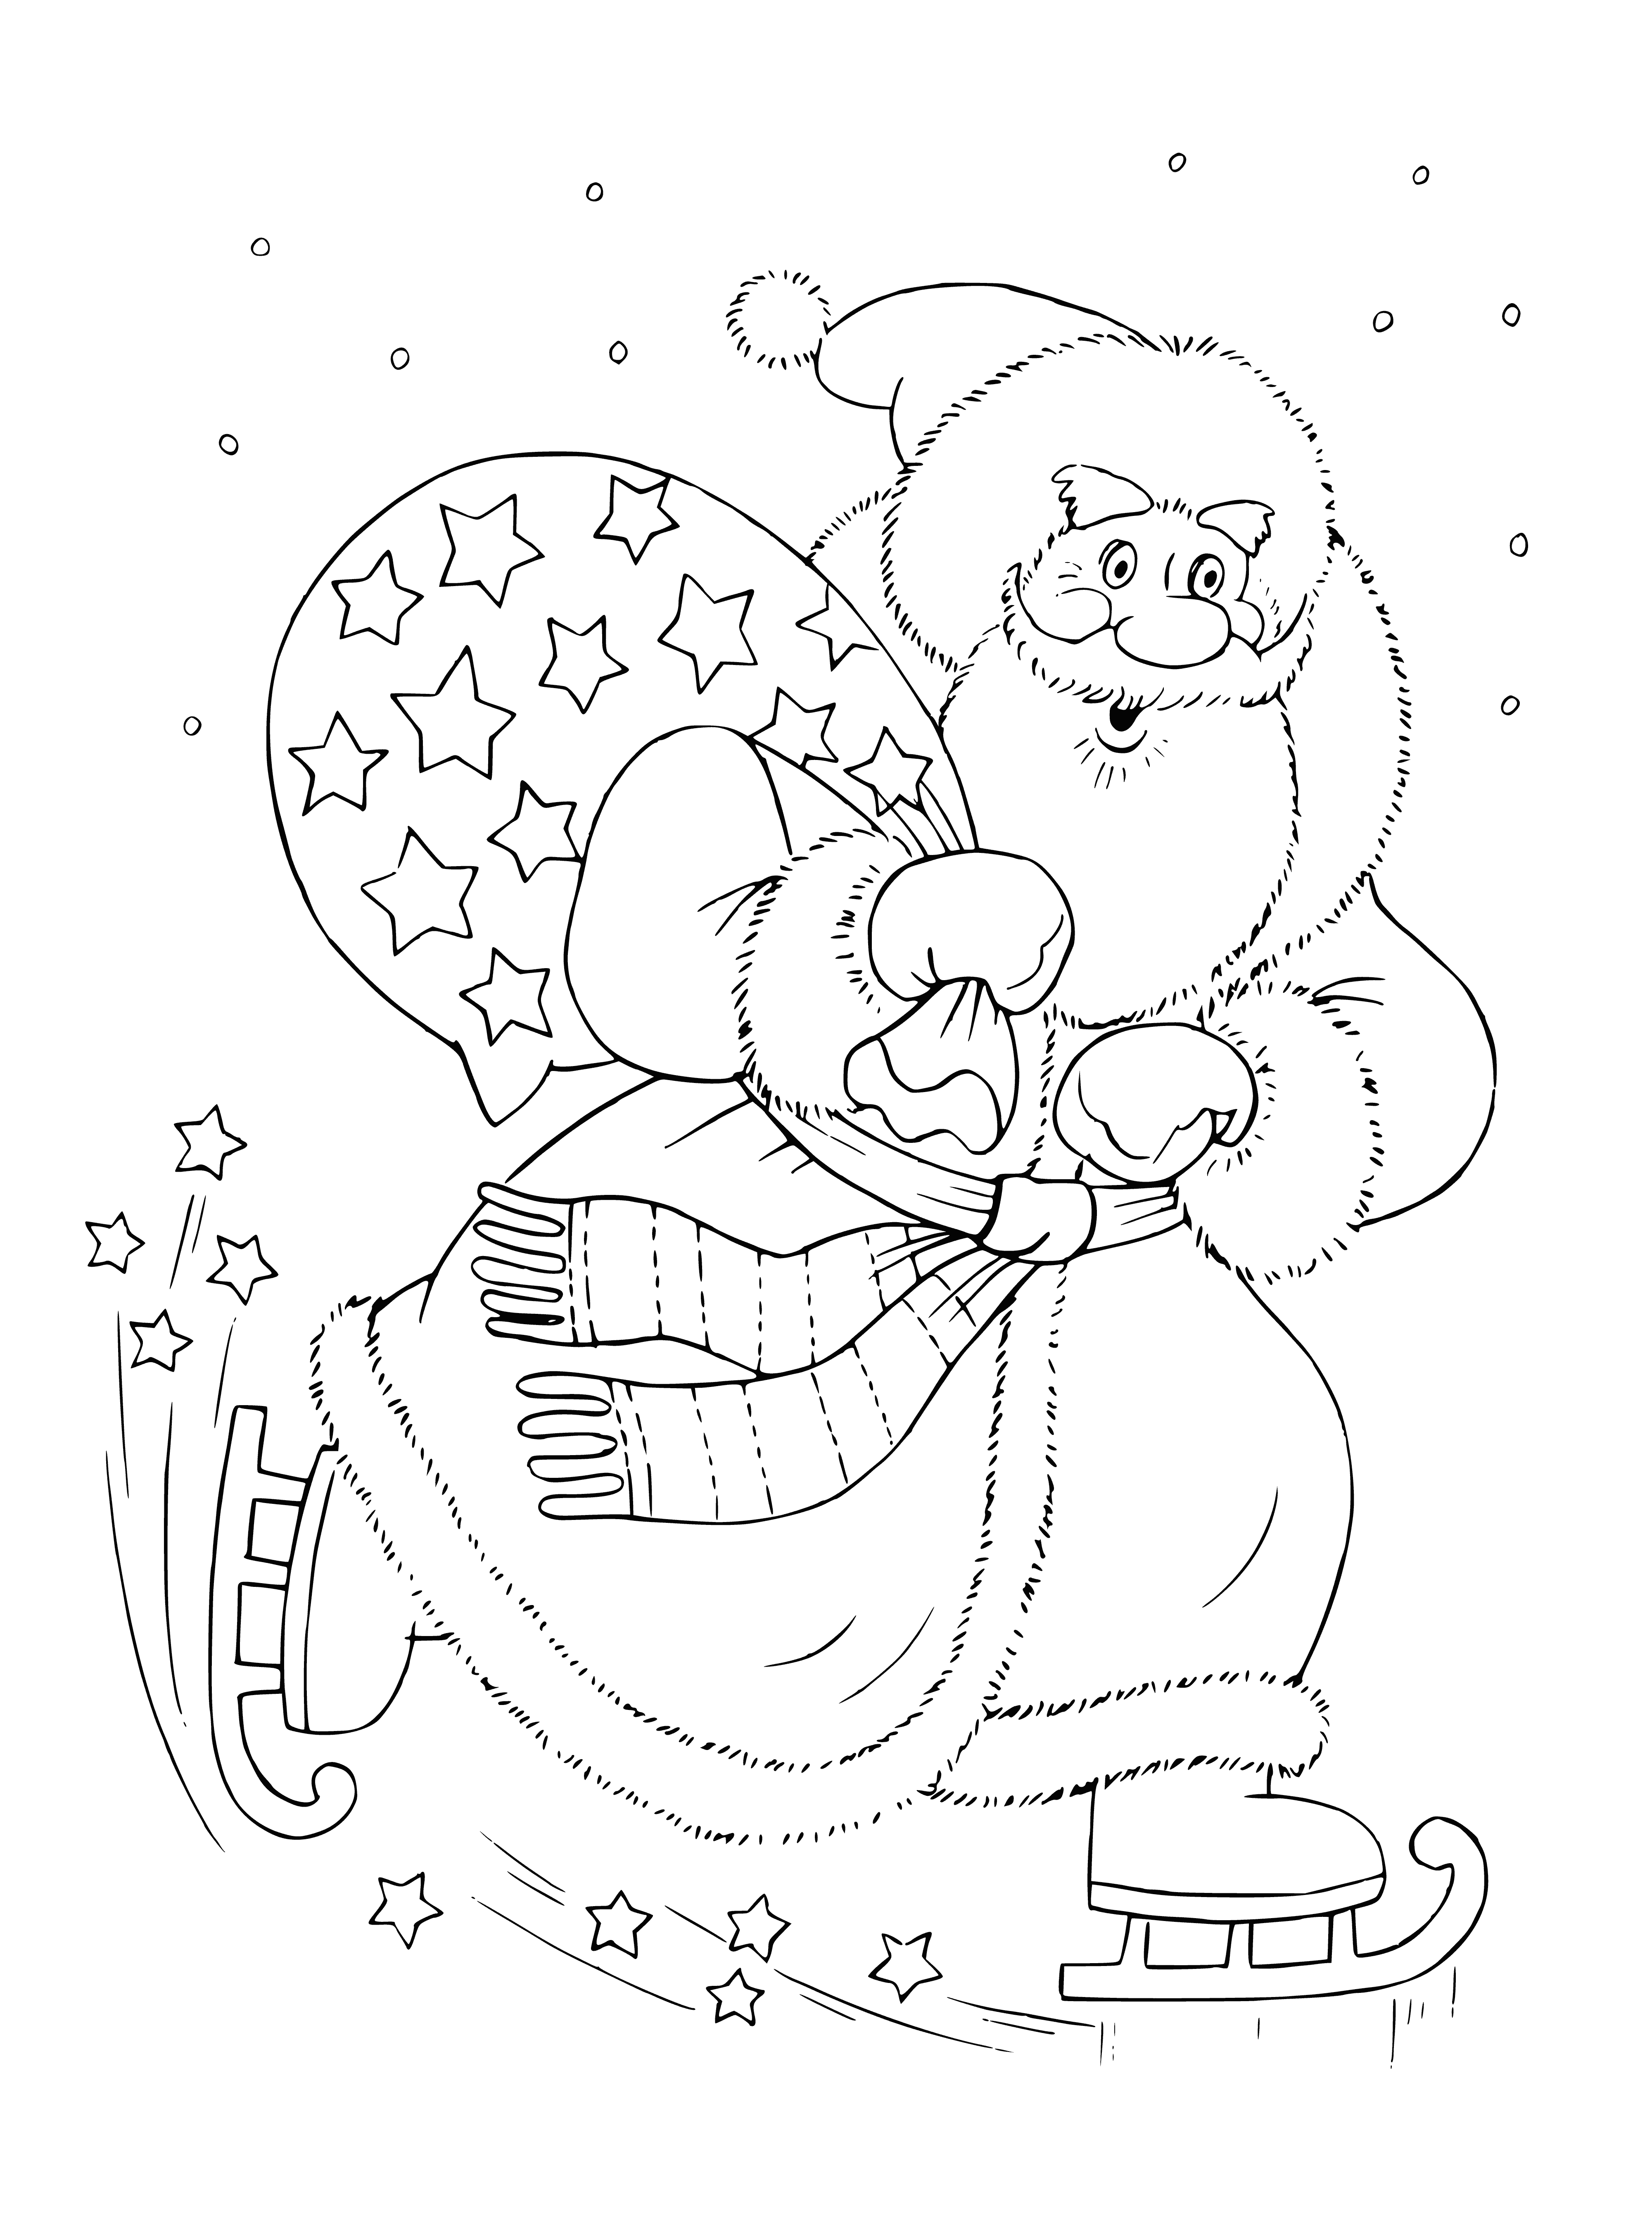 coloring page: Santa skating on a lake, holding a present. Red suit & white beard, red hat on his head.